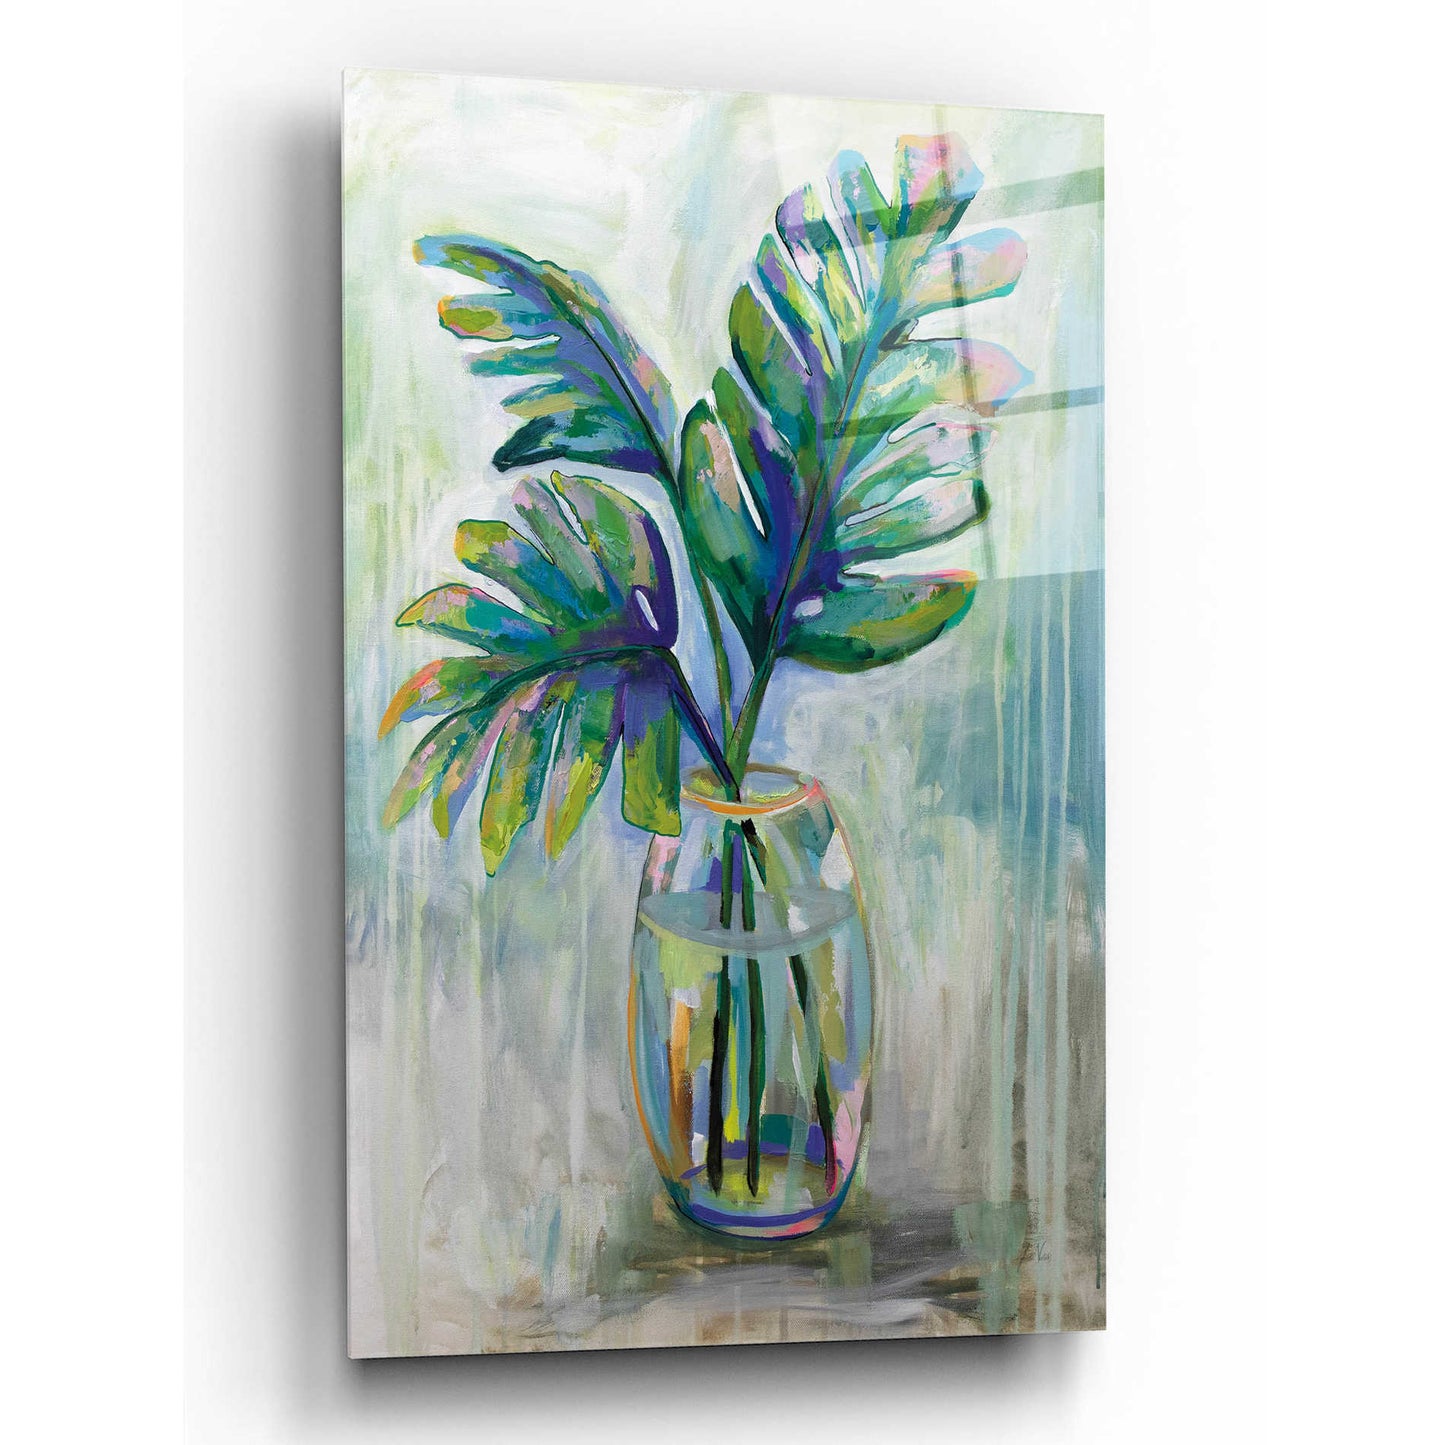 Epic Art 'Palm Leaves II' by Jeanette Vertentes, Acrylic Glass Wall Art,12x16